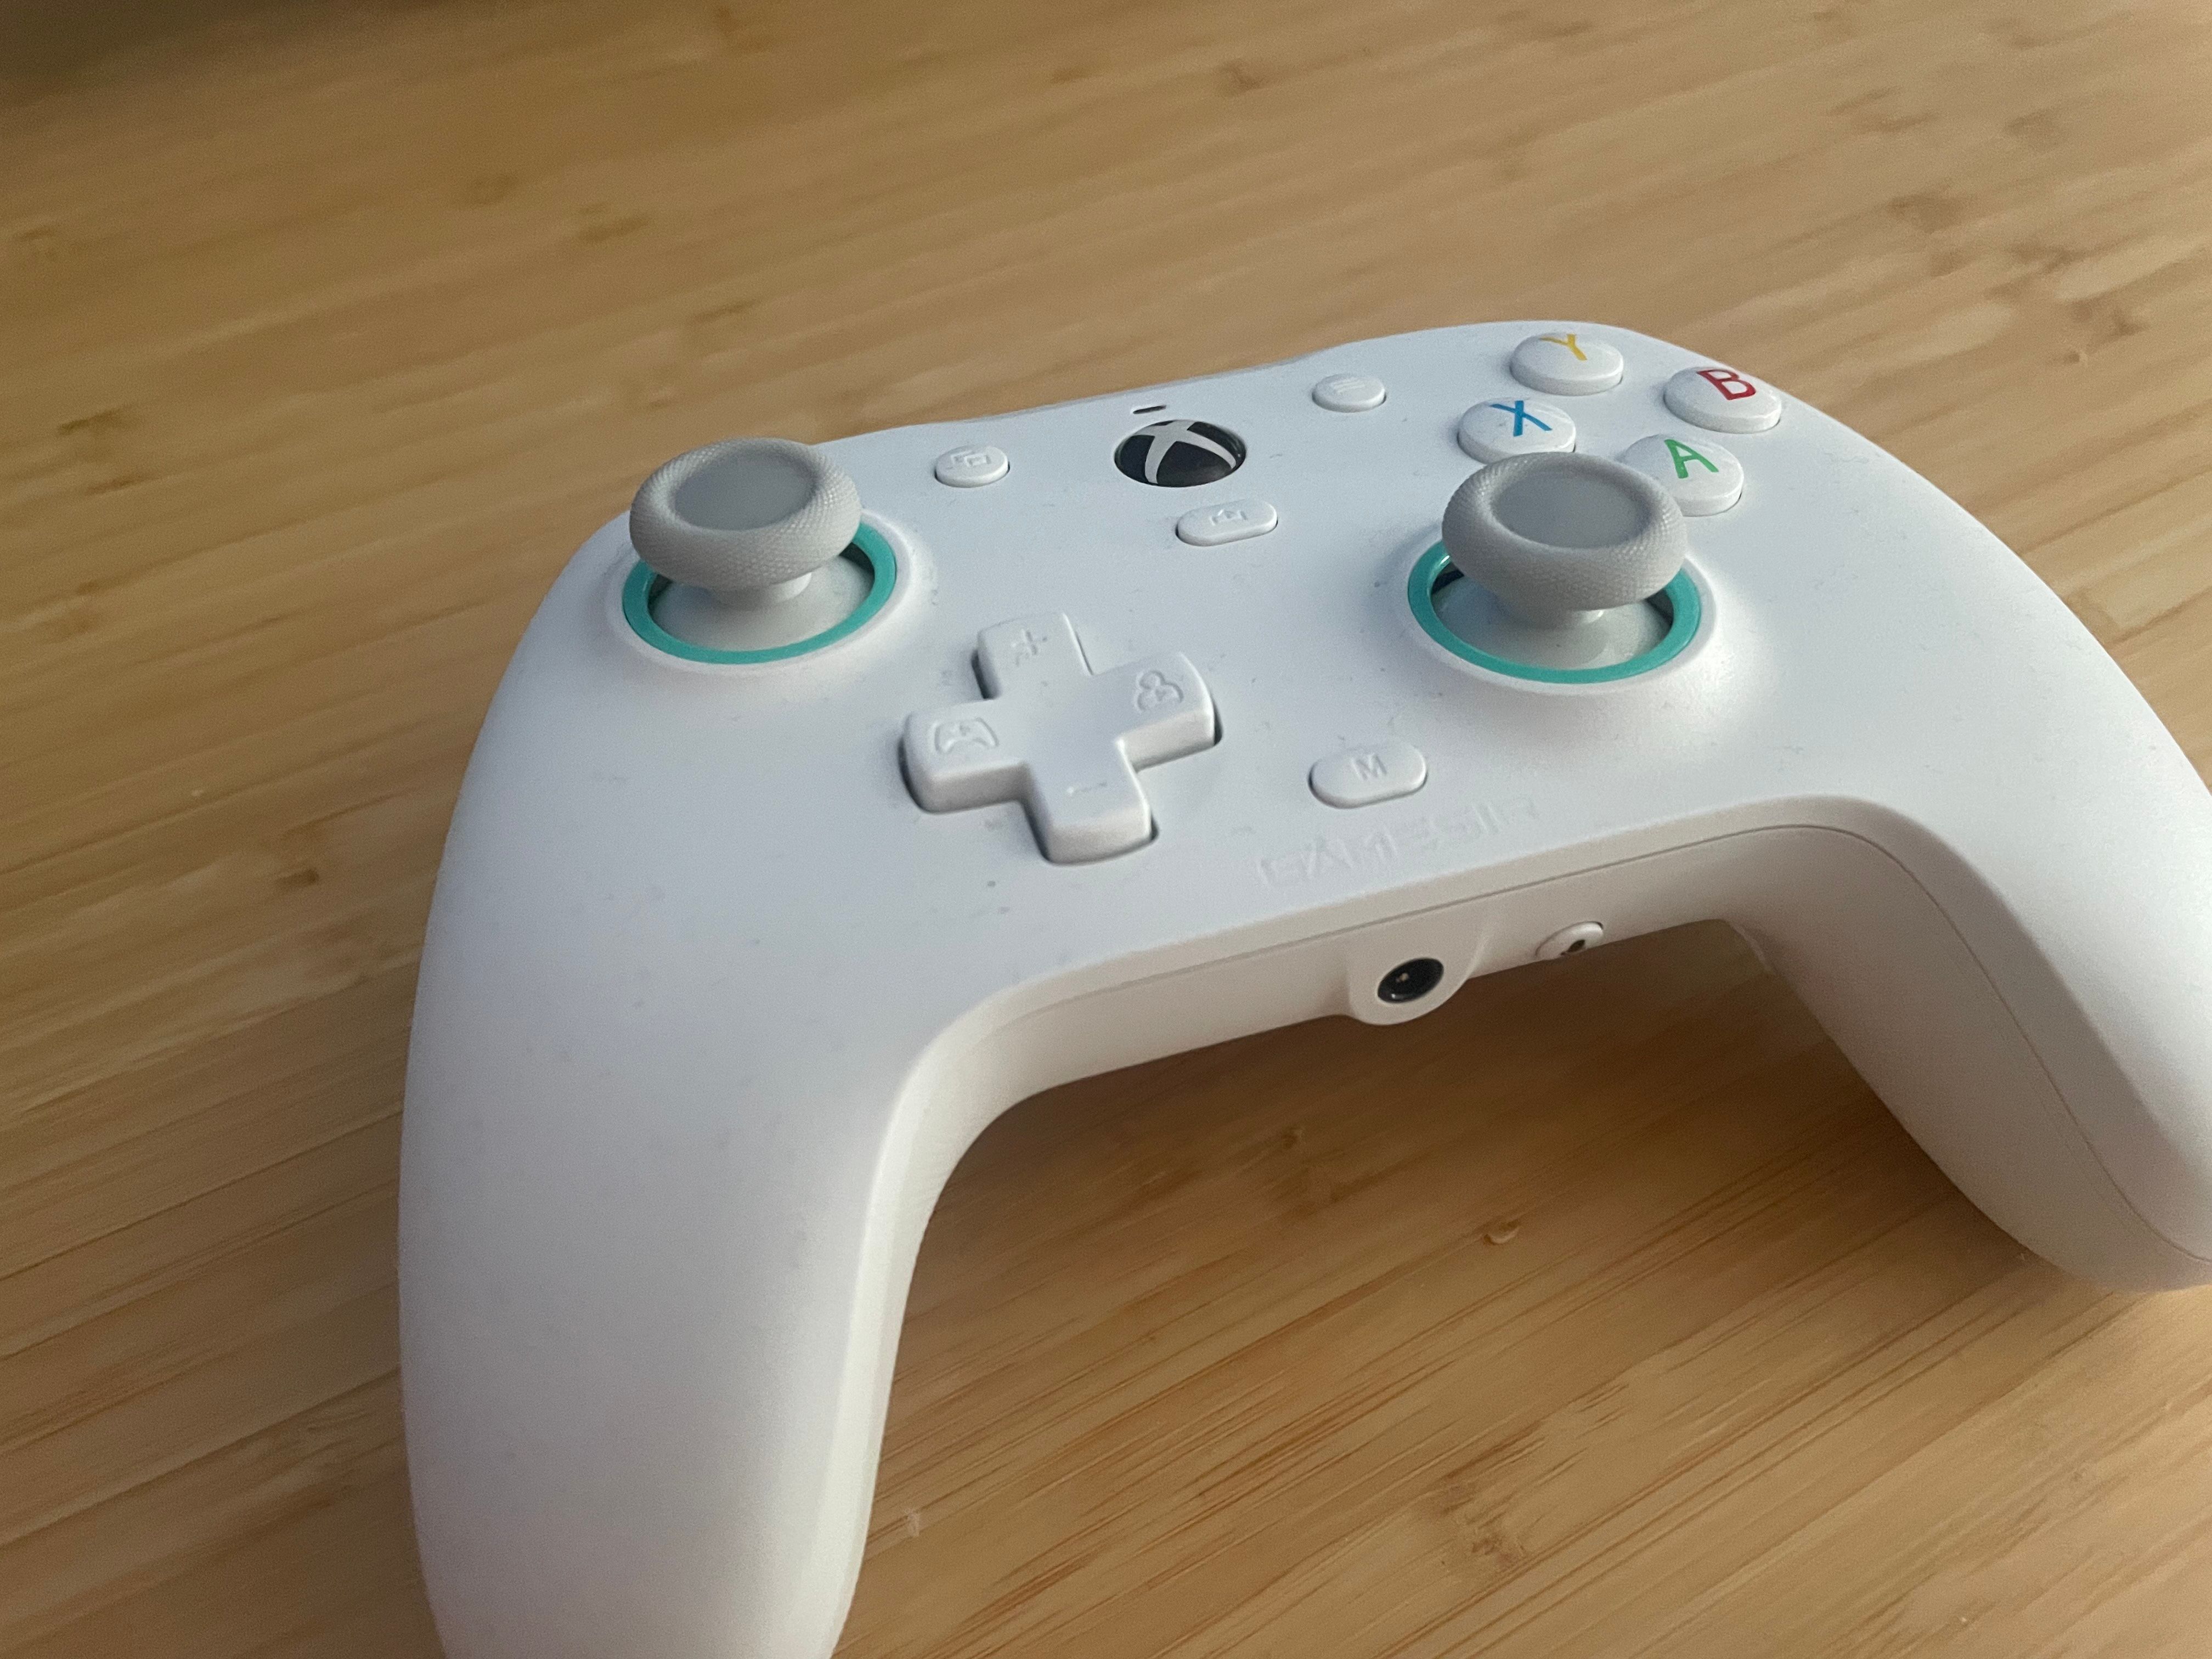 GameSir G7 is a colourful, customisable Xbox controller